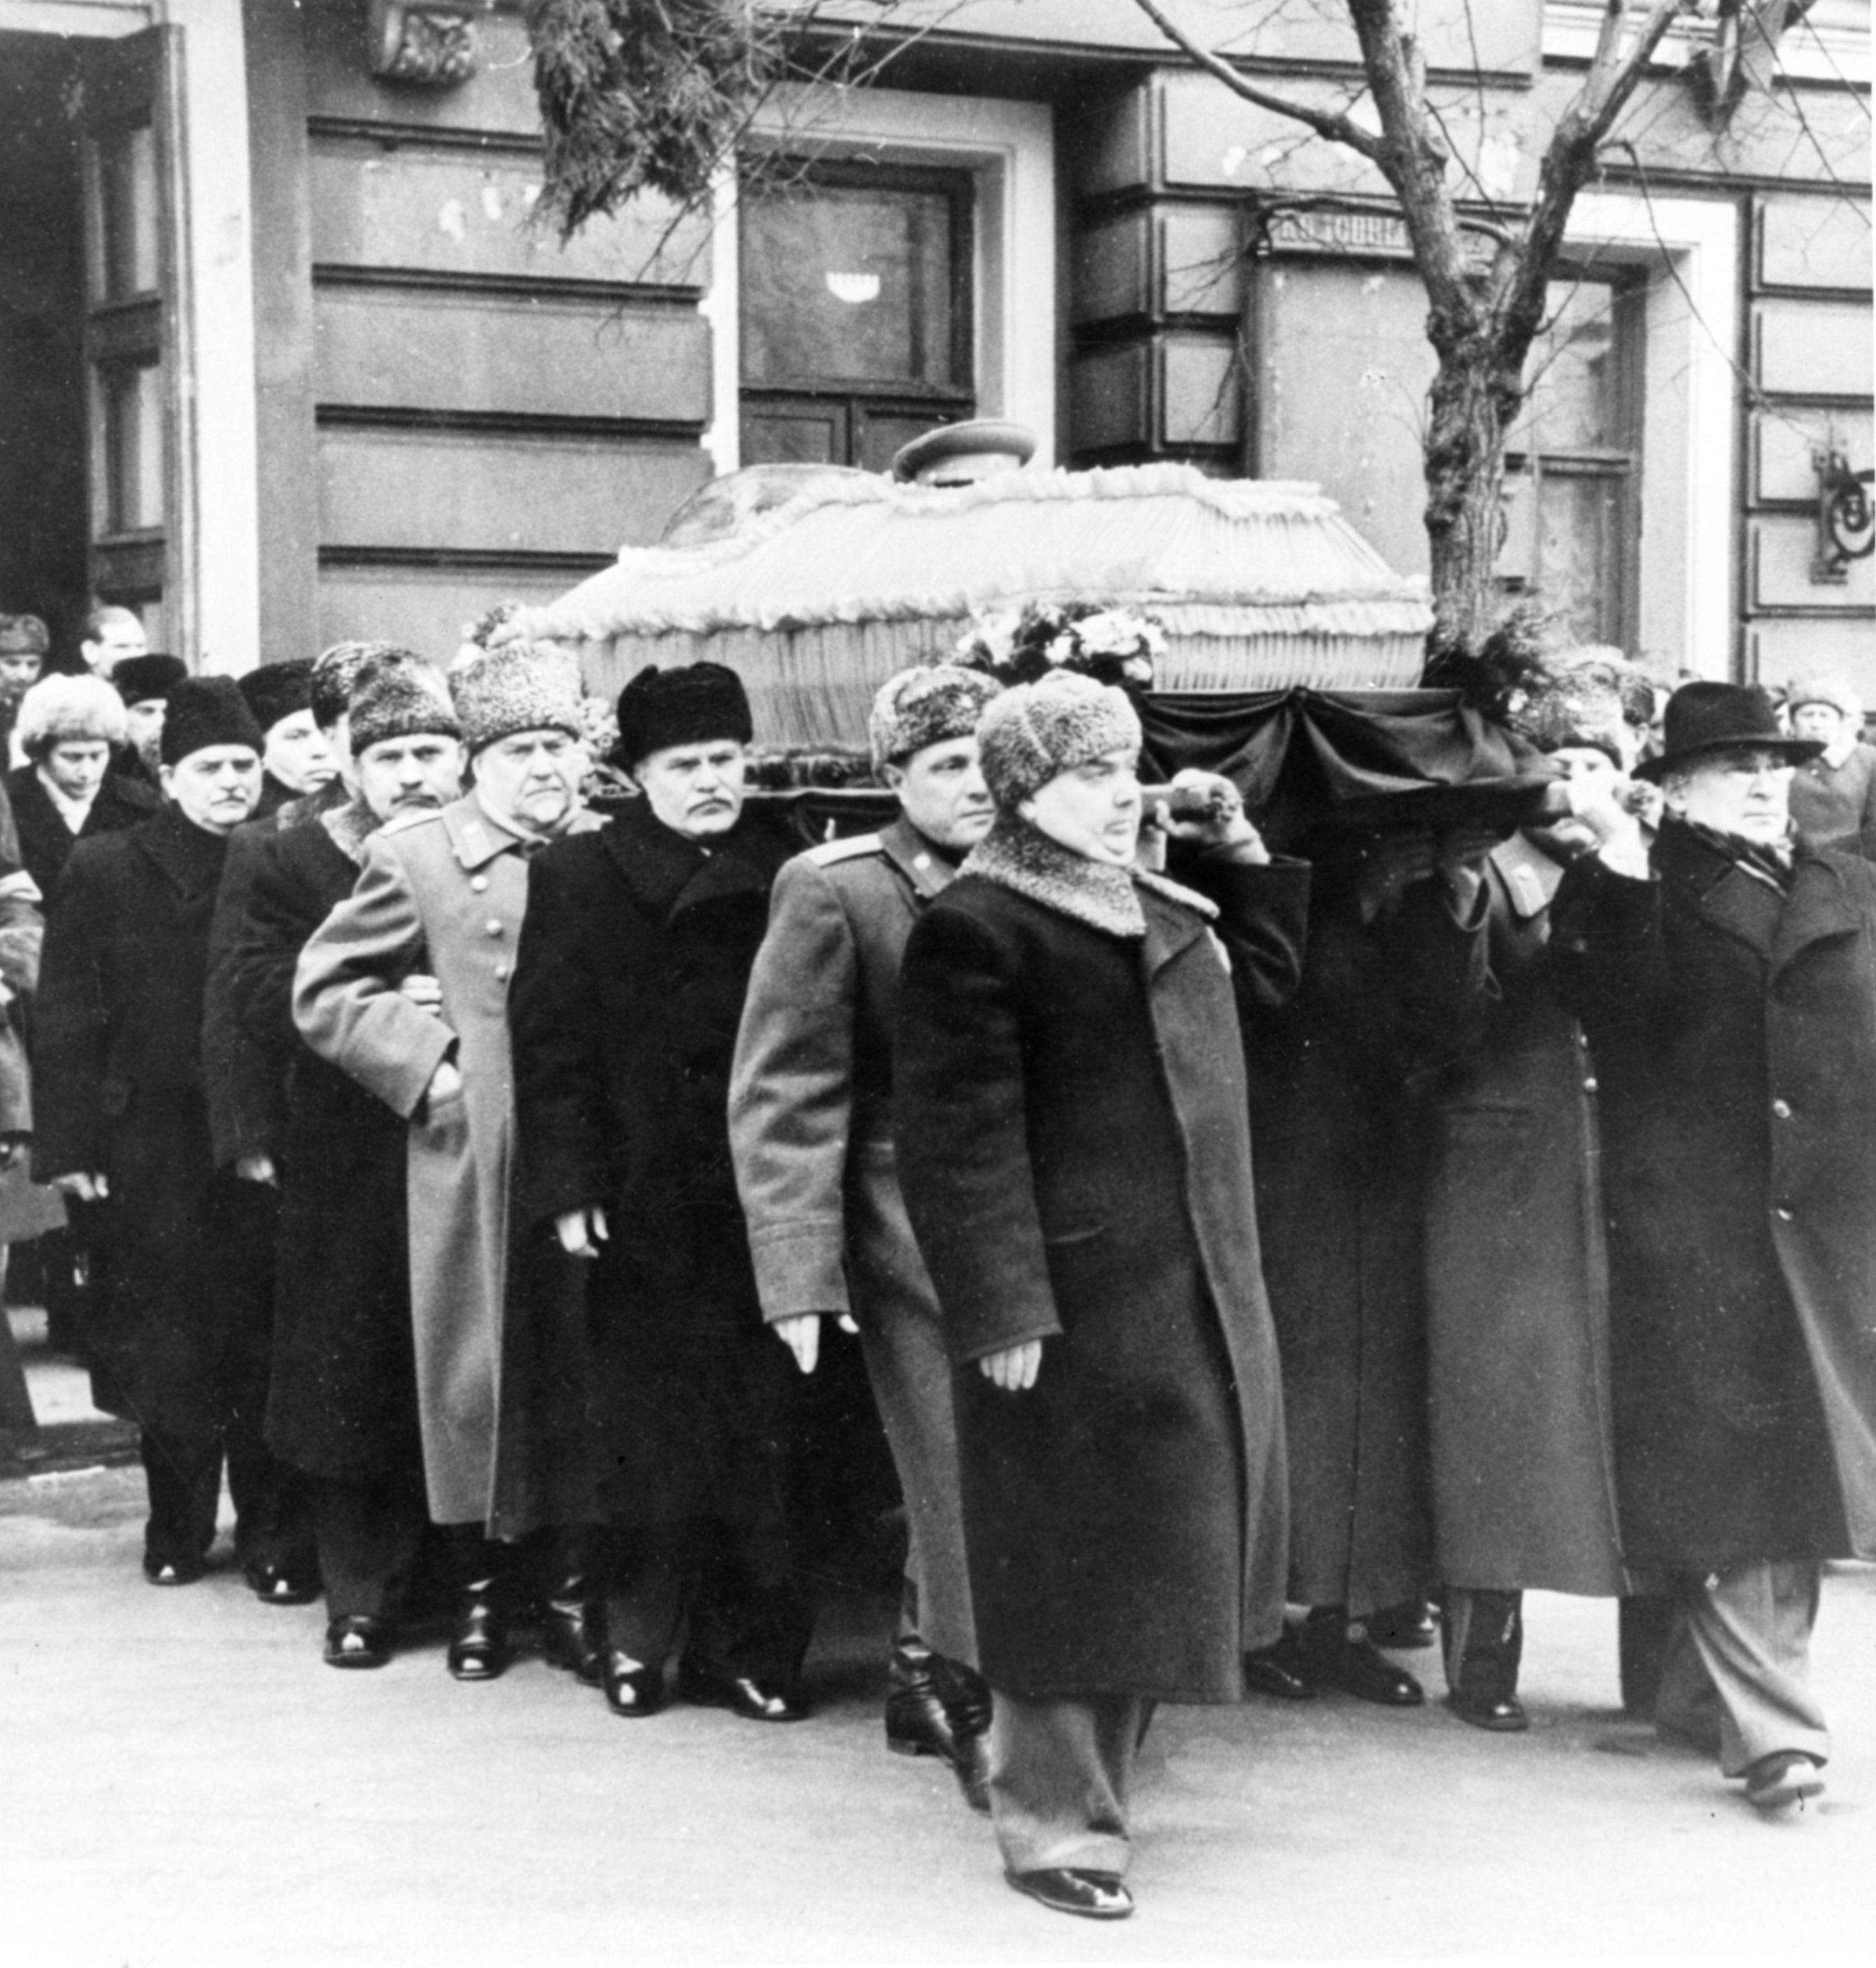 The coffin of stalin is being carried out of the house of trade unions, moscow, march 9, 1953, right to left: l, p, beria (far right), premier g, m, malenkov, general vassily stalin, v, m, molotov, marshal n, bulganin, l, kaganovich, n, shvernik.